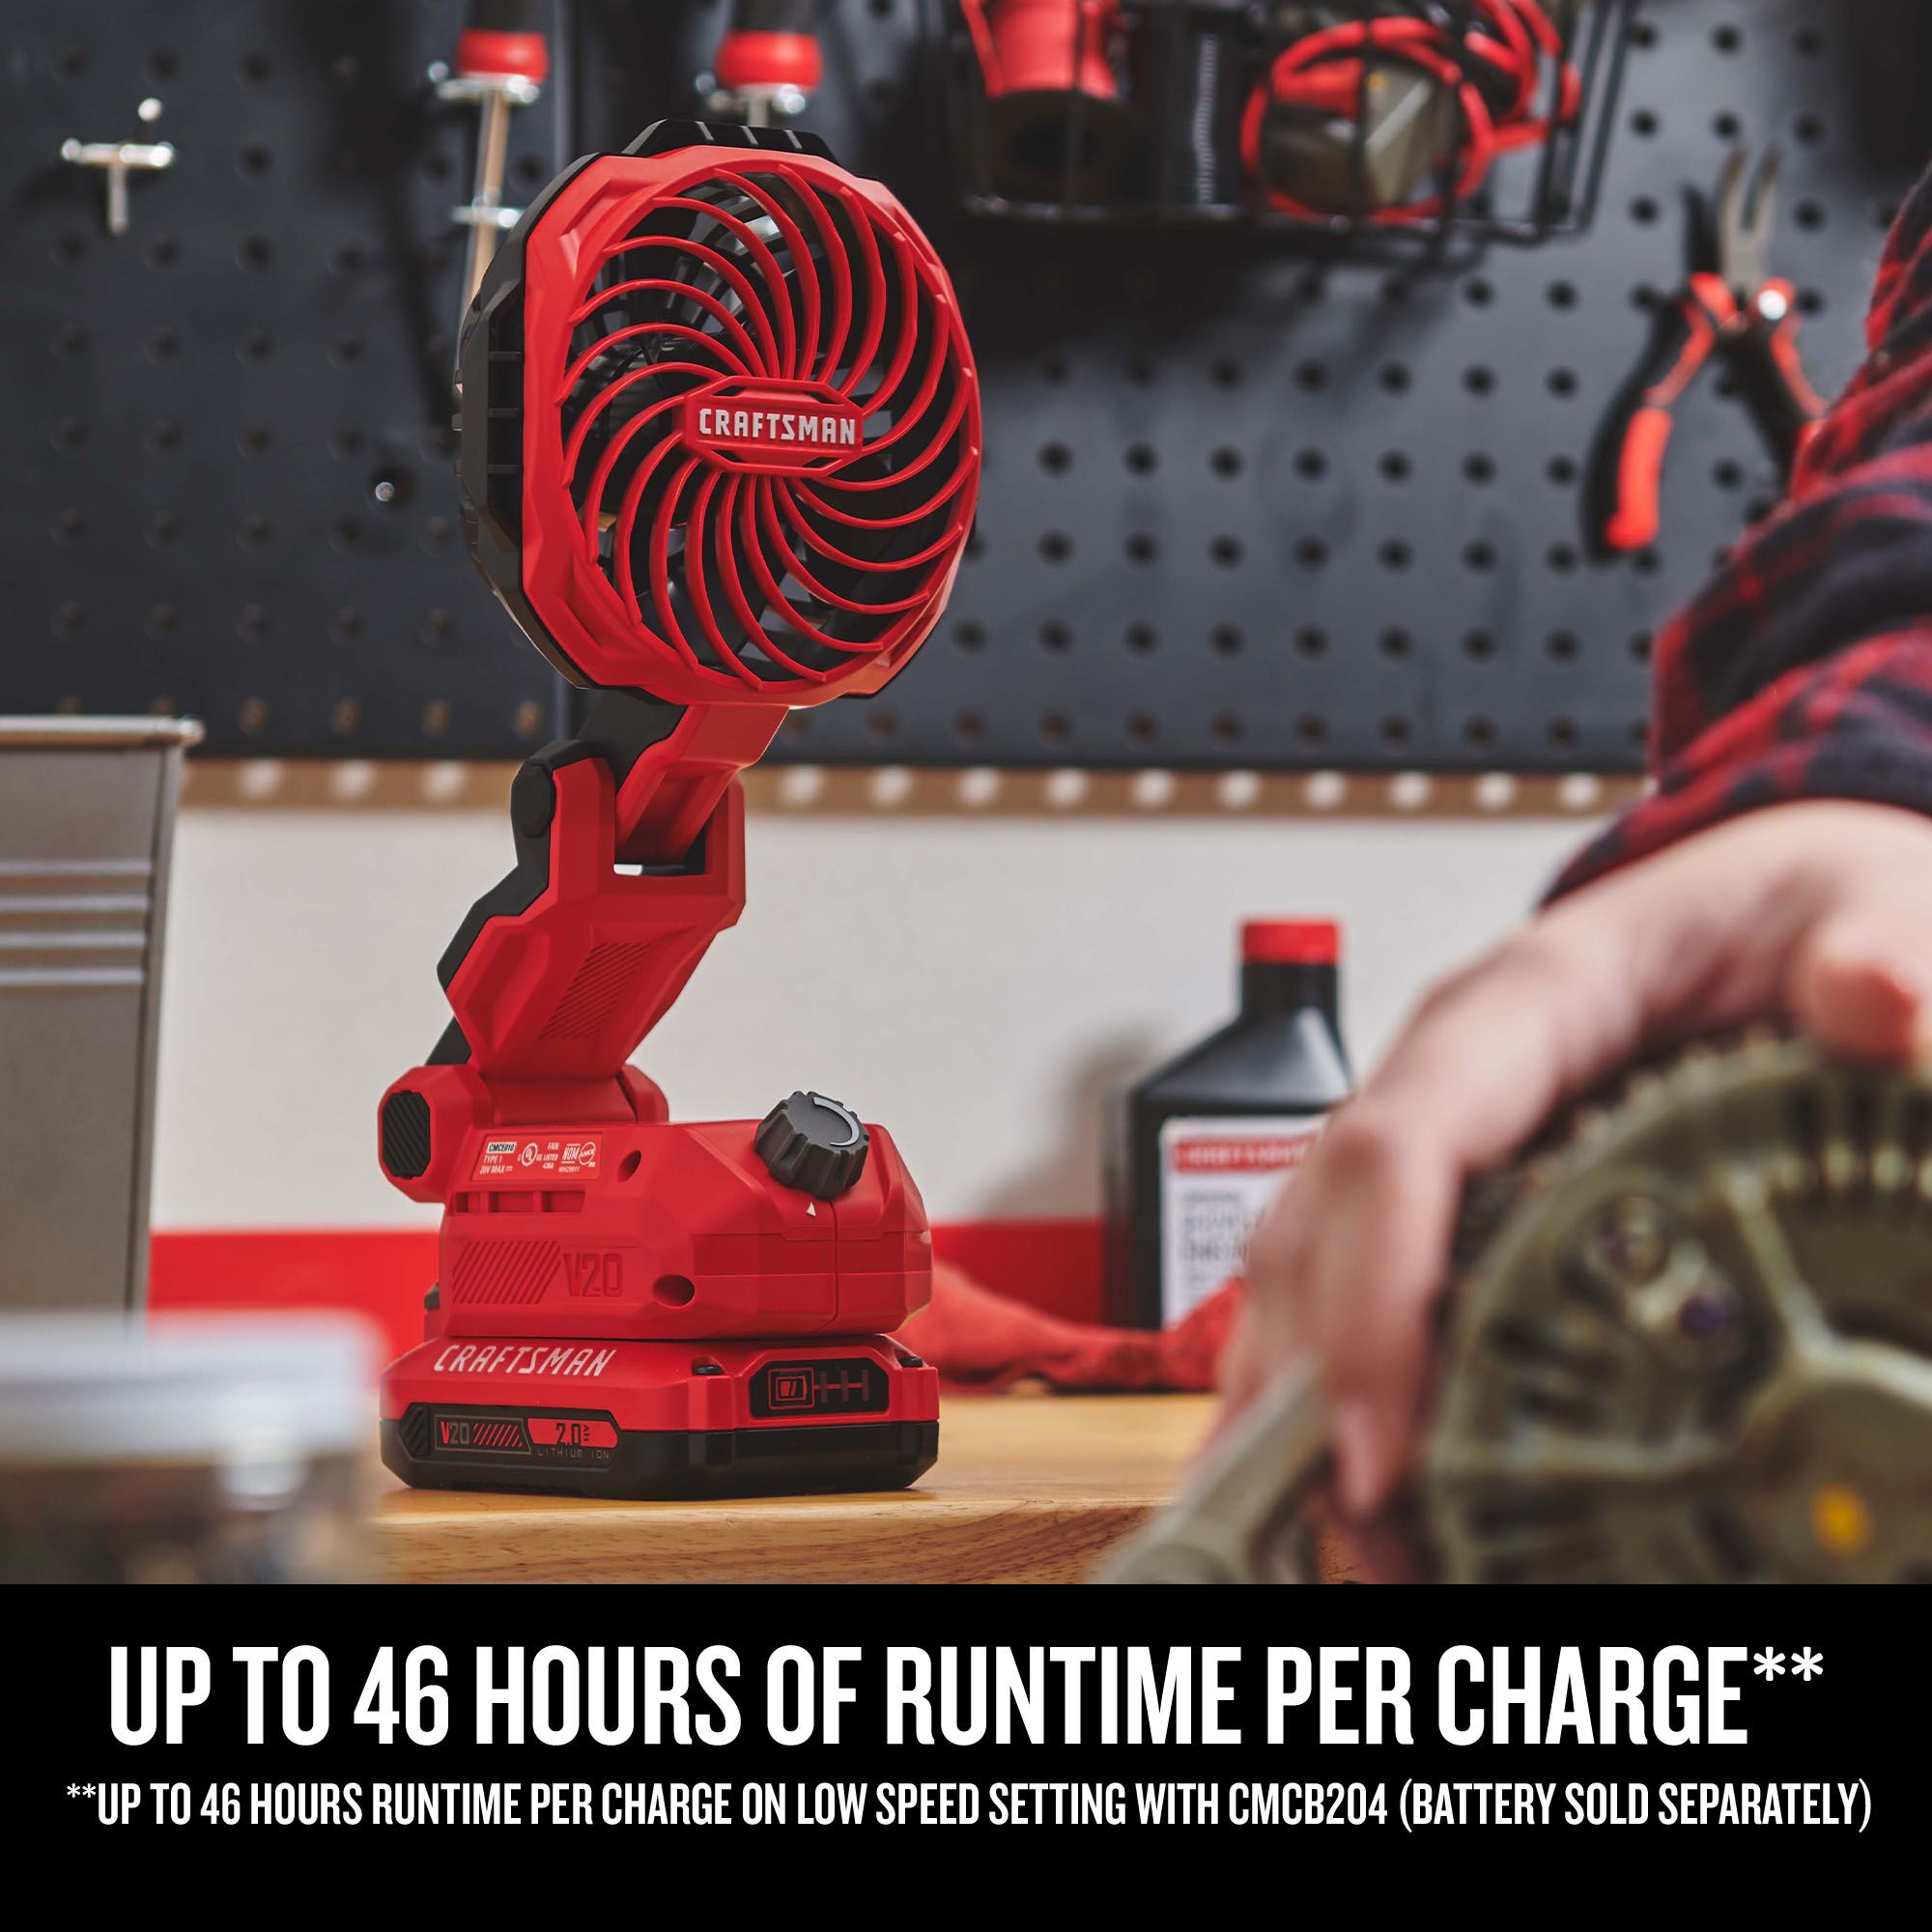 CRAFTSMAN(R) V20 Compact Personal Fan sitting on a work bench, highlighting up to 46 hours of runtime per charge